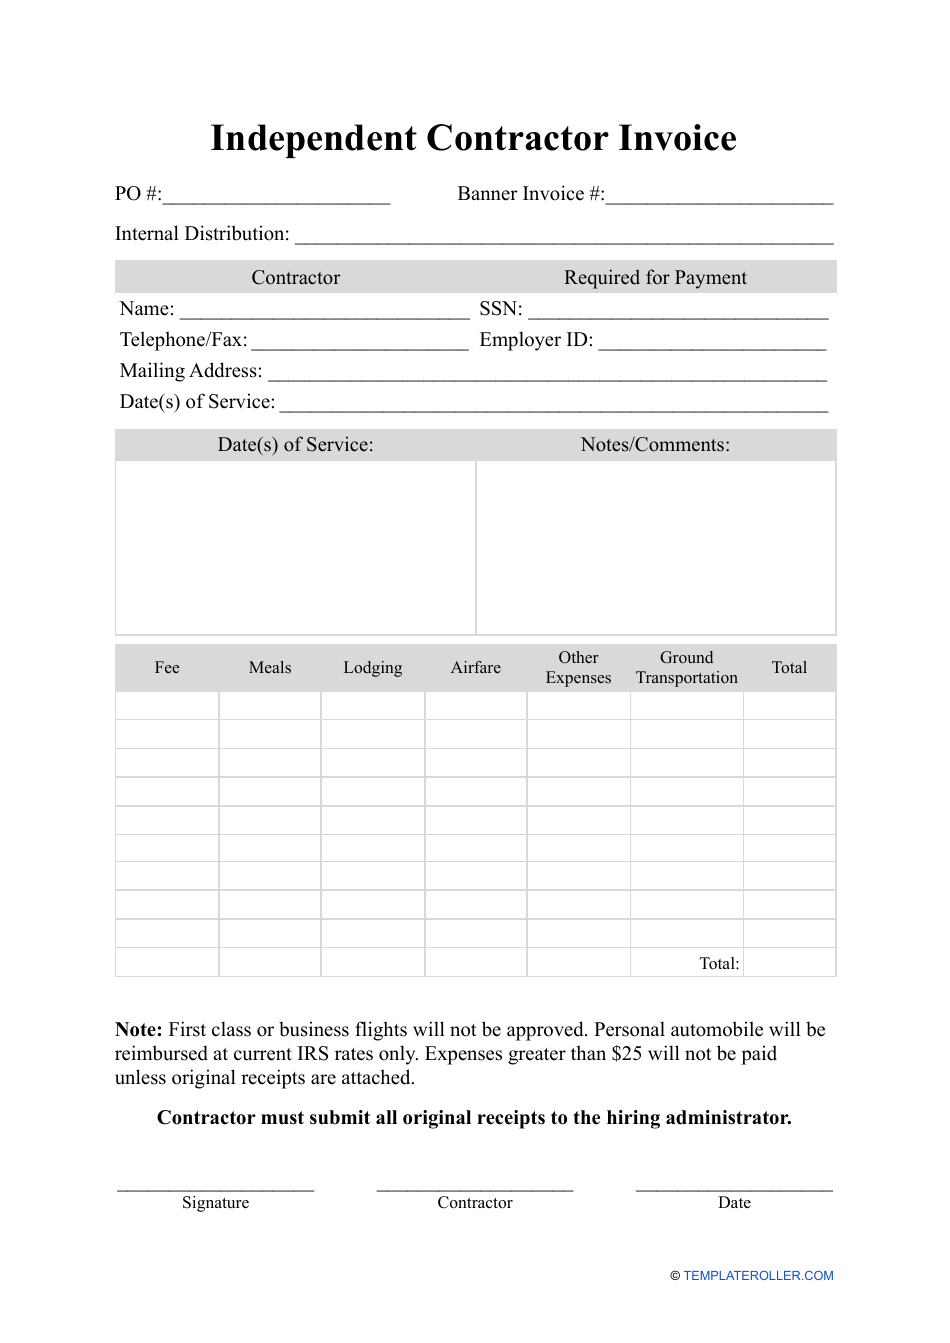 Independent Contractor Invoice Template Fill Out Sign Online And Download PDF Templateroller